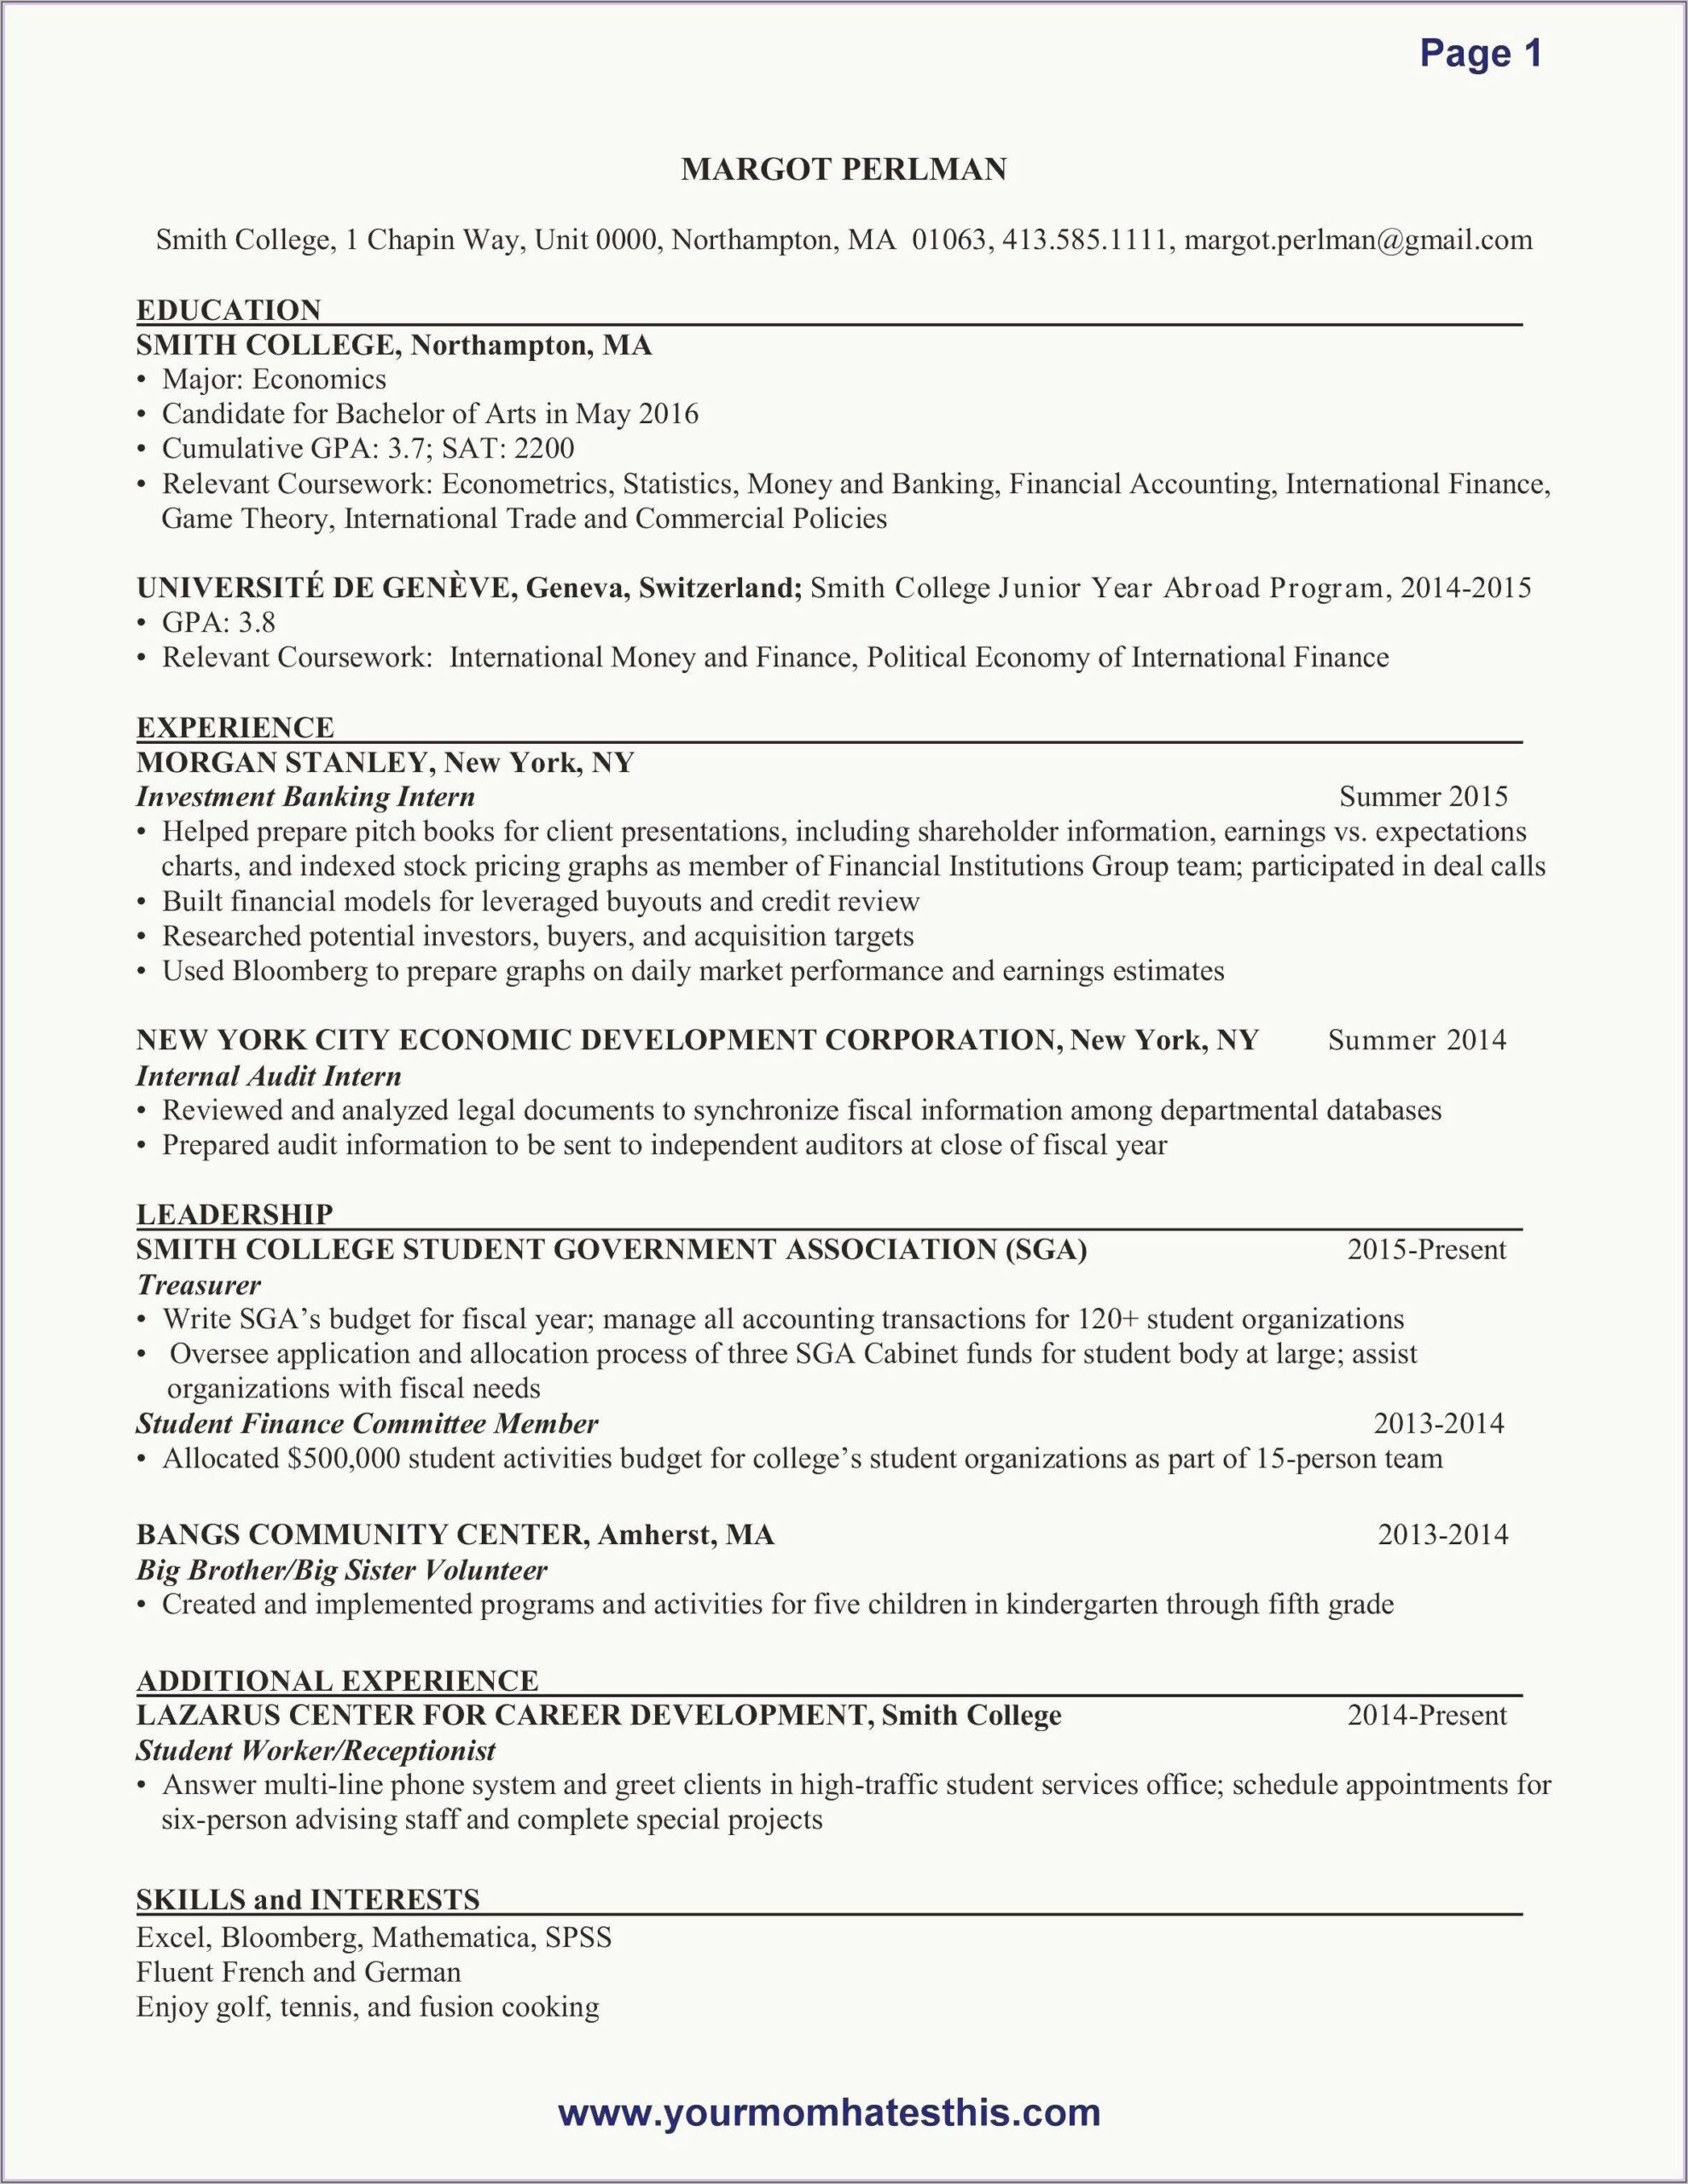 Culinary Arts Student Resume Objectives